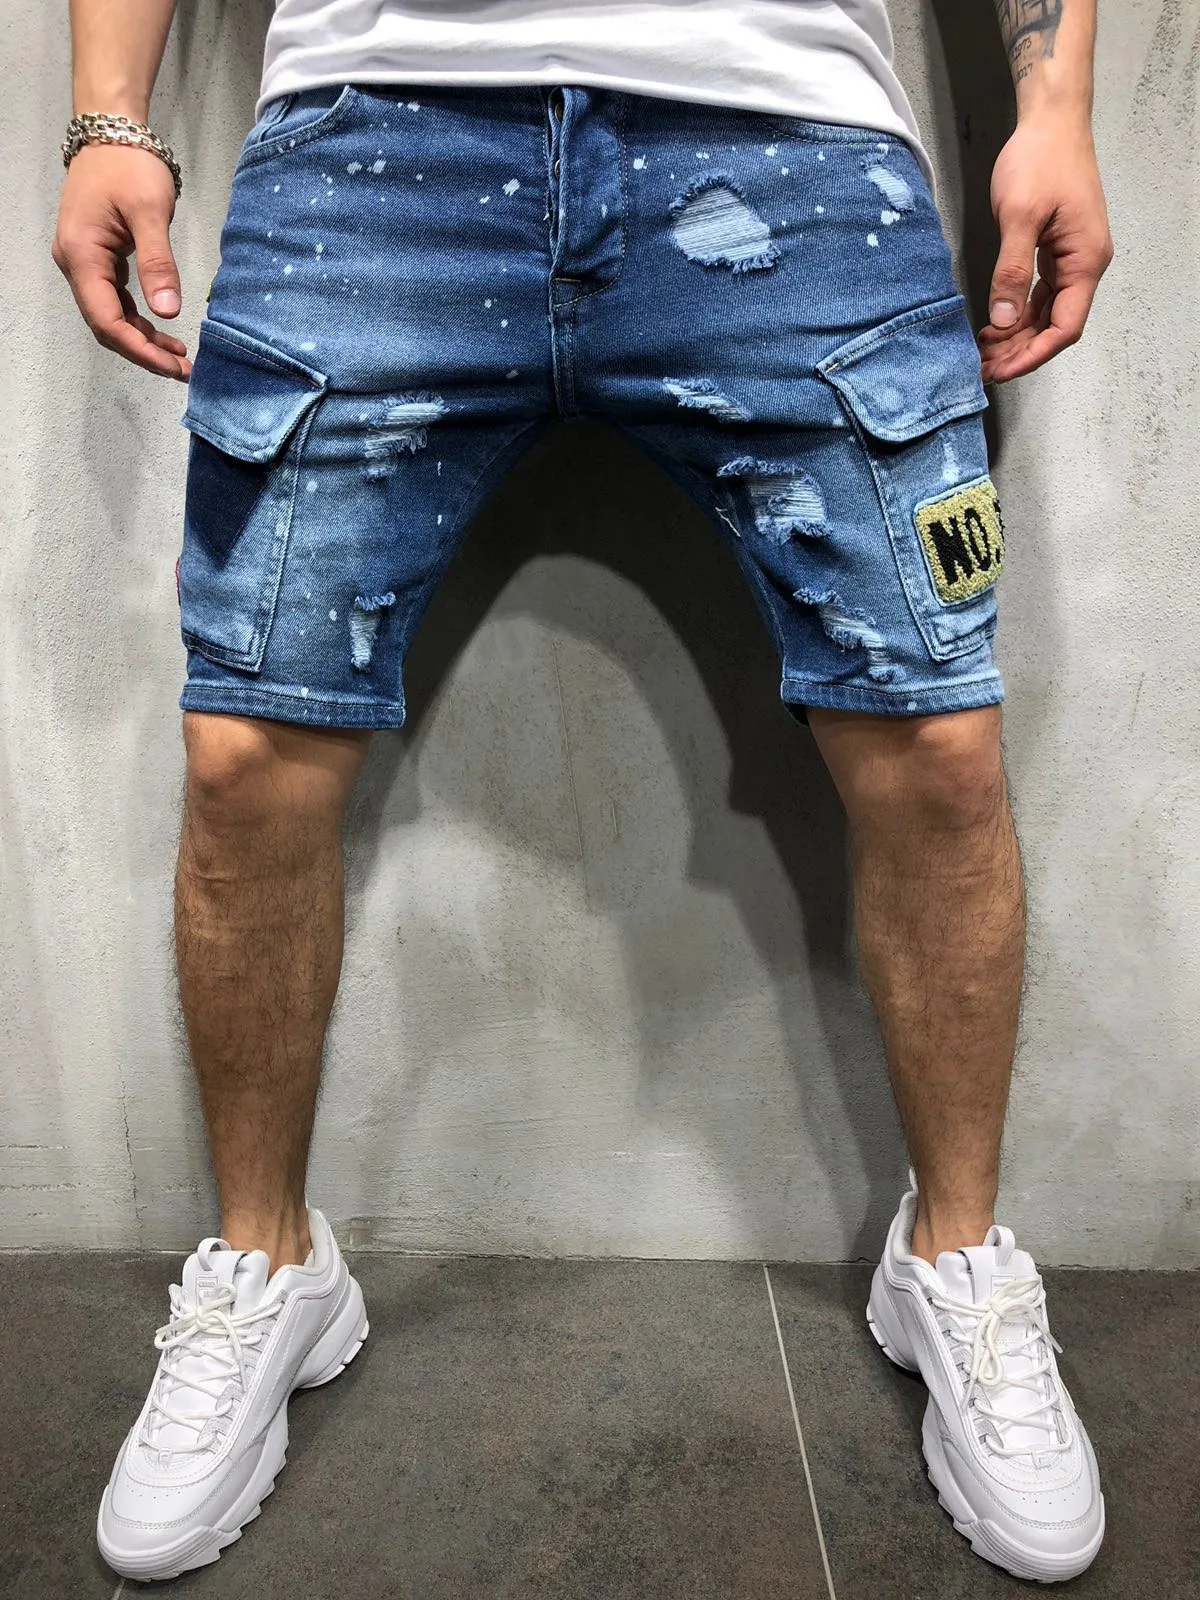 

2021 Summer New Men's Stretch Short Jeans Fashion Casual Slim Fit High Quality Elastic Denim Shorts Male Brand Clothes